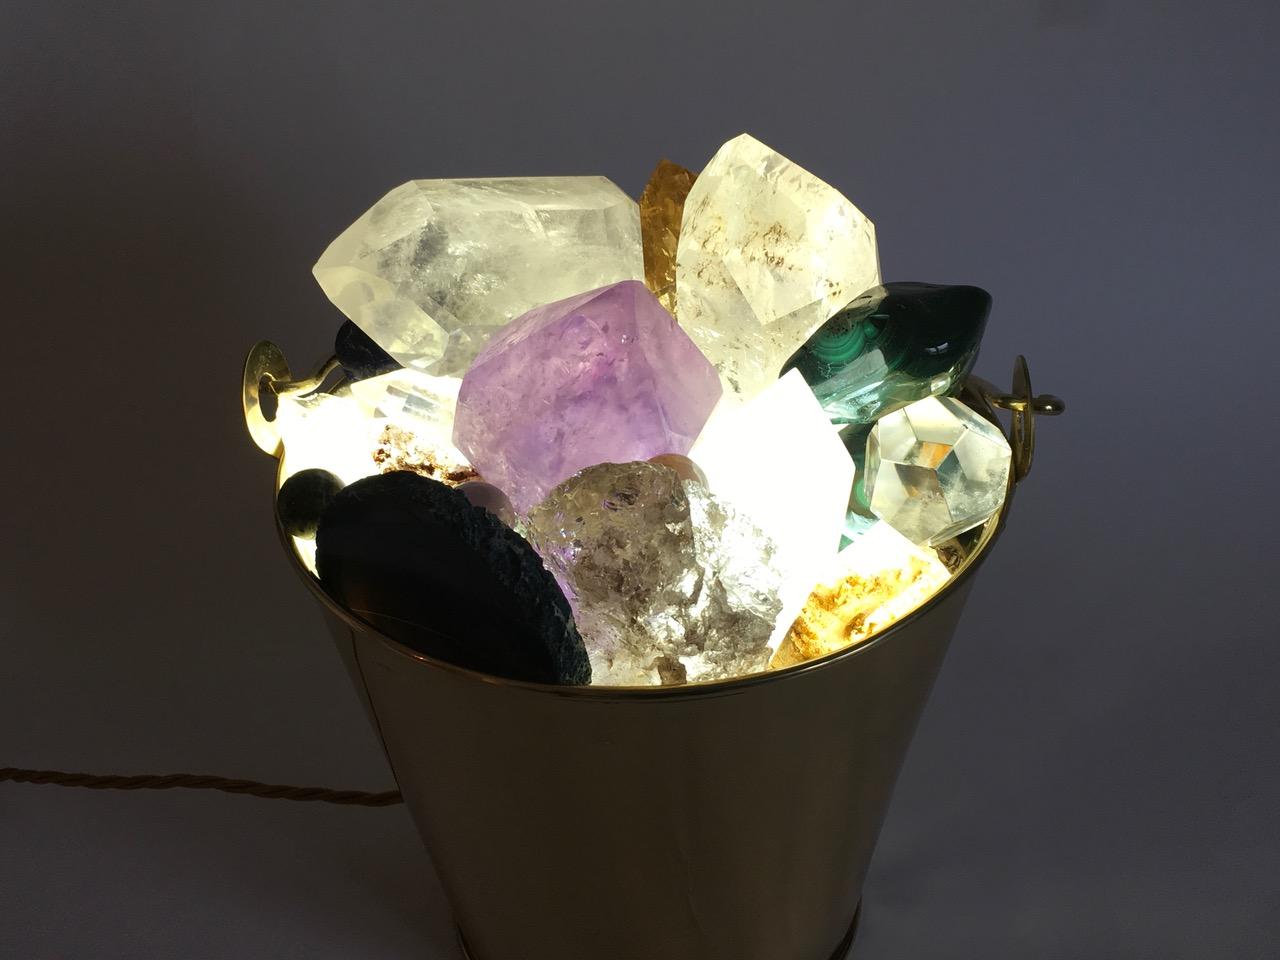 Table lamp Eldorado, brass bucket with quartz and malachite stones, lapis, agate, amethyst, pyrite etc. designed by Studio Superego for Superego Editions.

Biography
Superego editions was born in 2006, performing a constant activity of research in